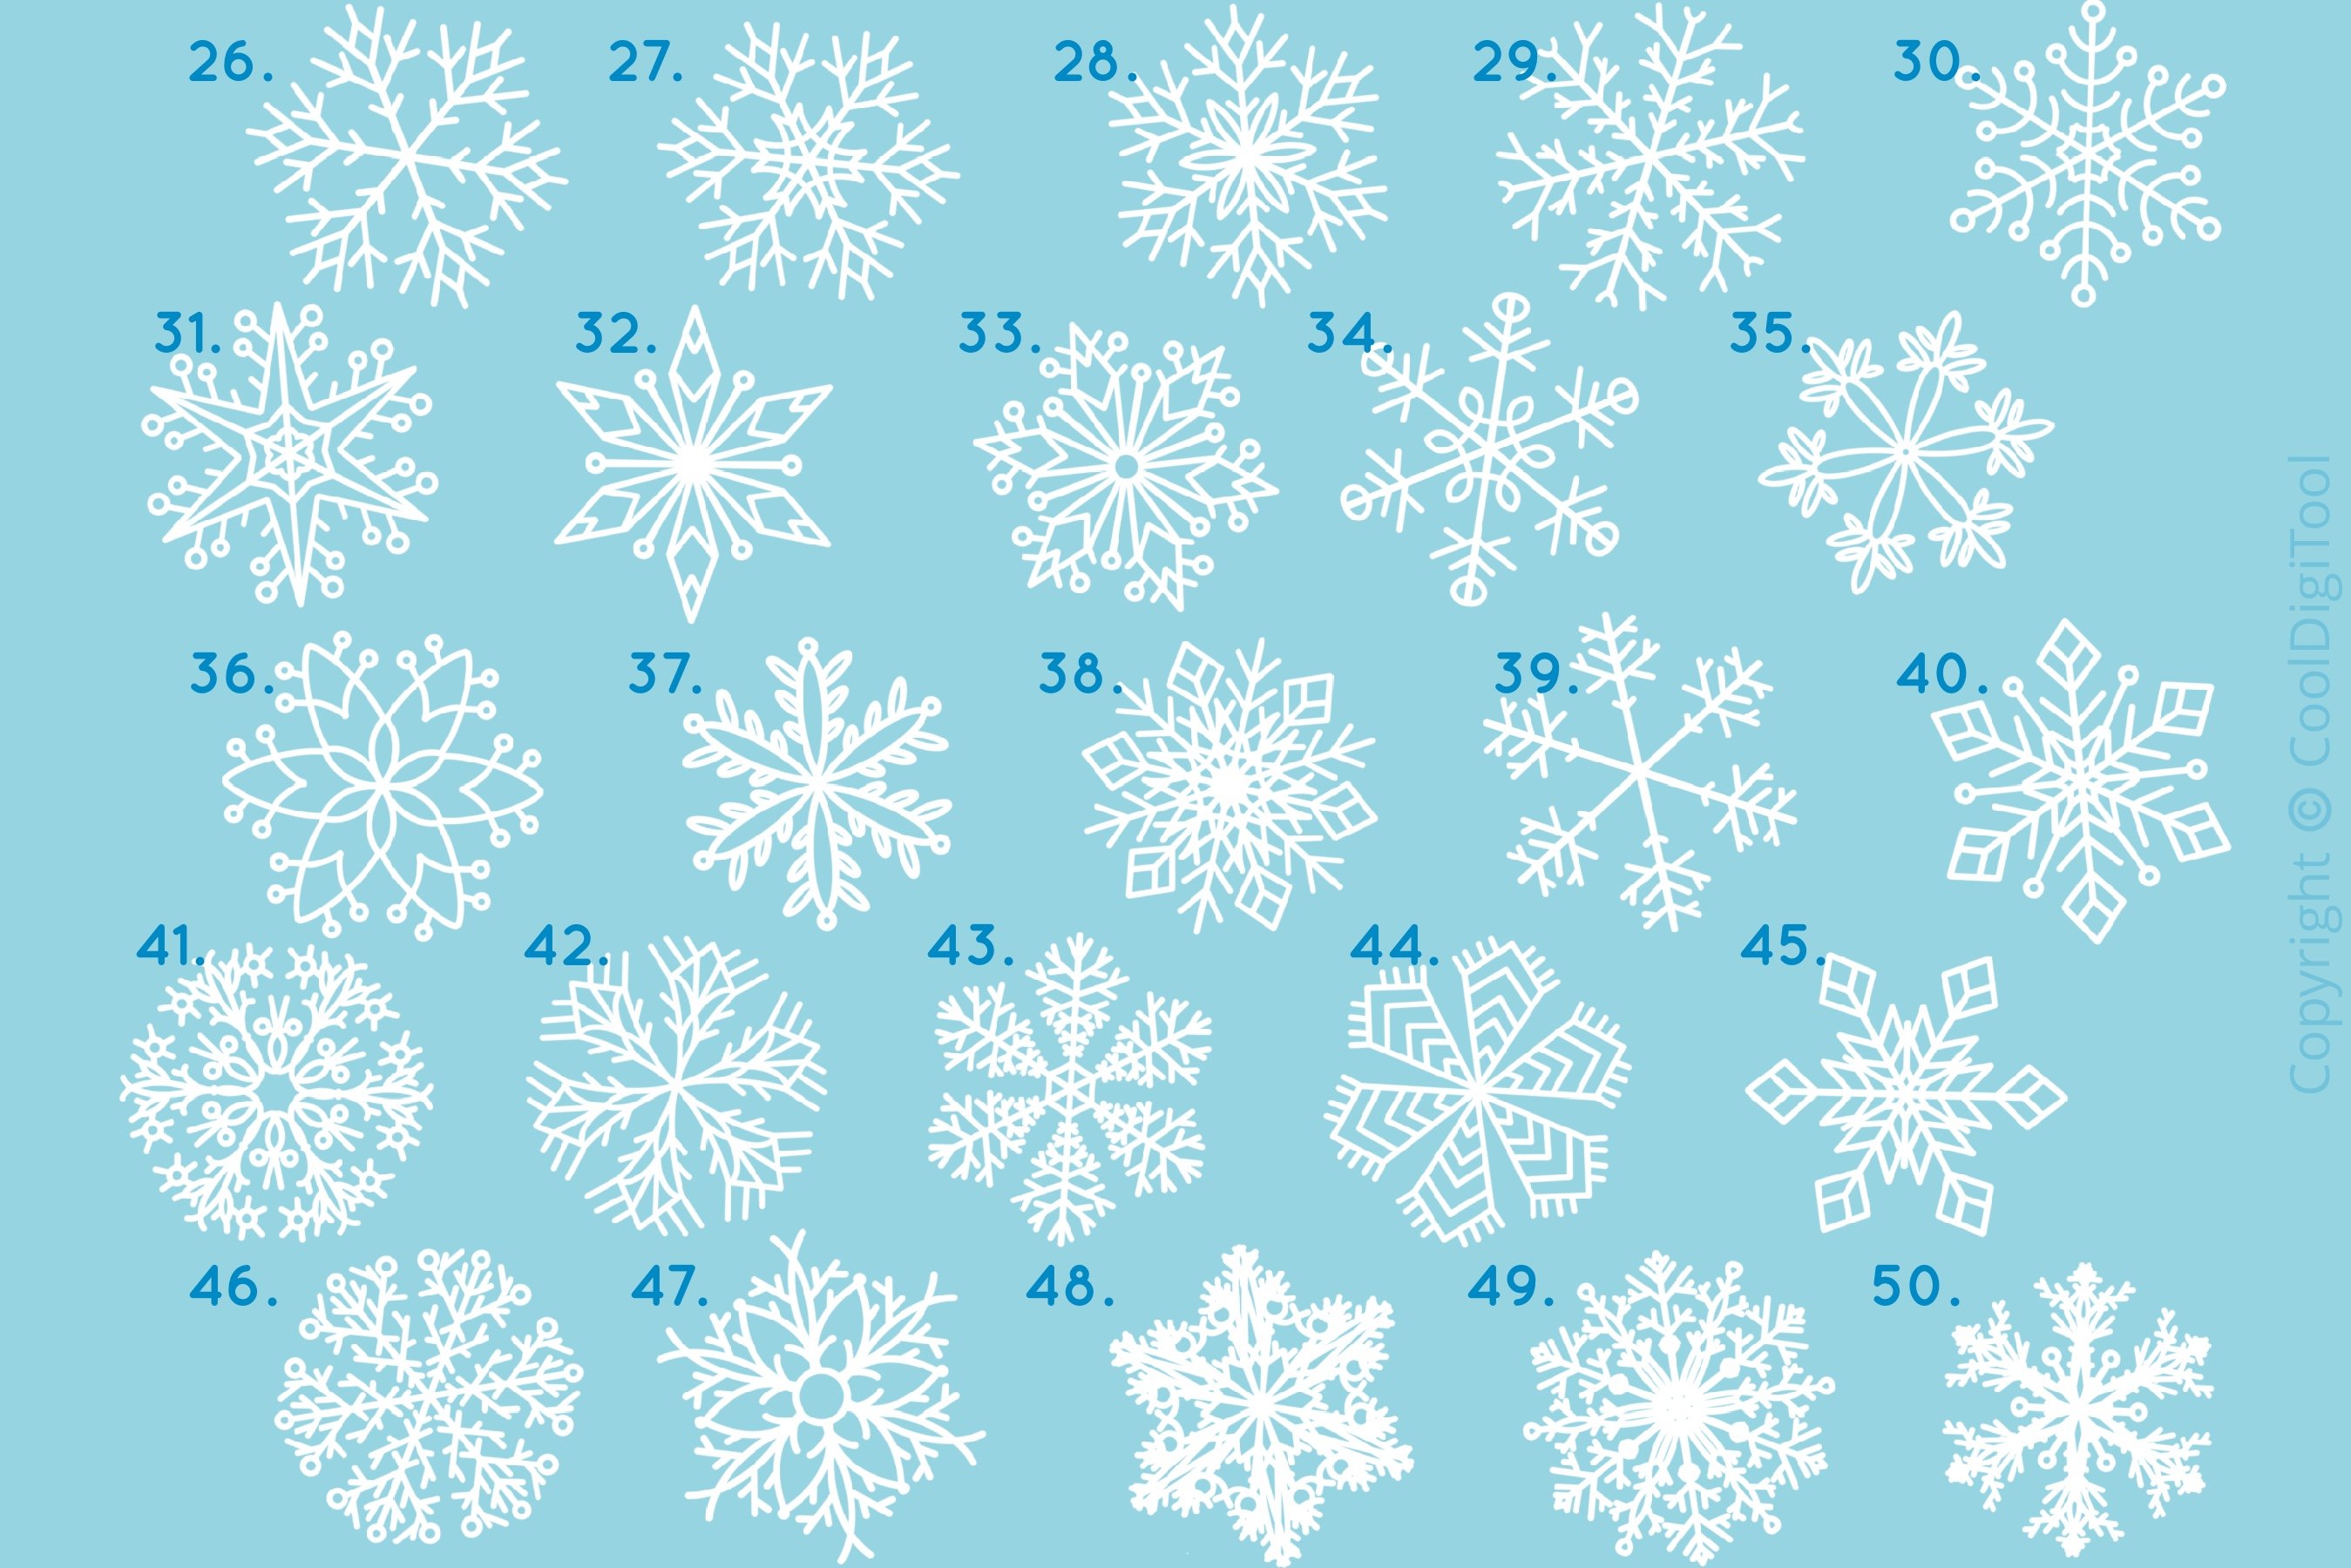 Snowflake Procreate Brush Stamps Graphic by Nine Sky Designs · Creative  Fabrica